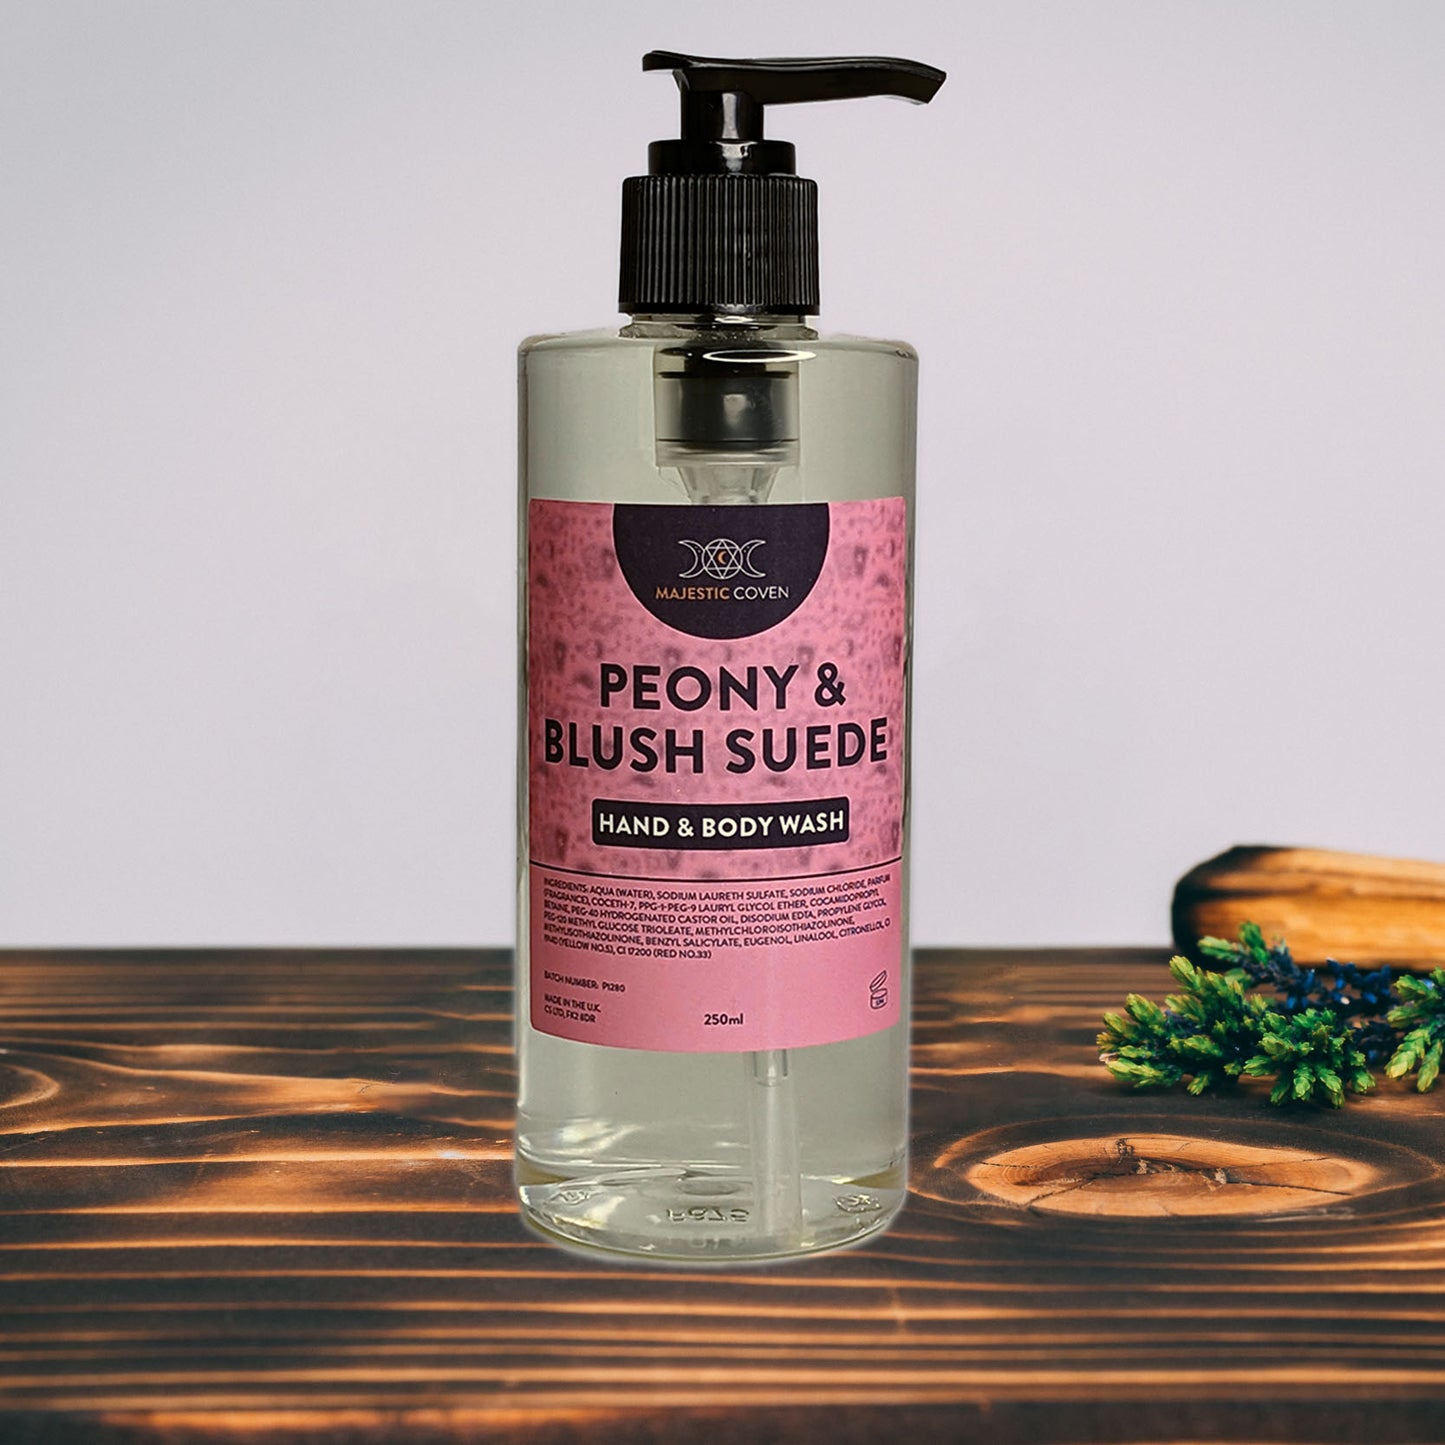 Peony & Blush Suede - Hand & Body Wash Majestic Coven